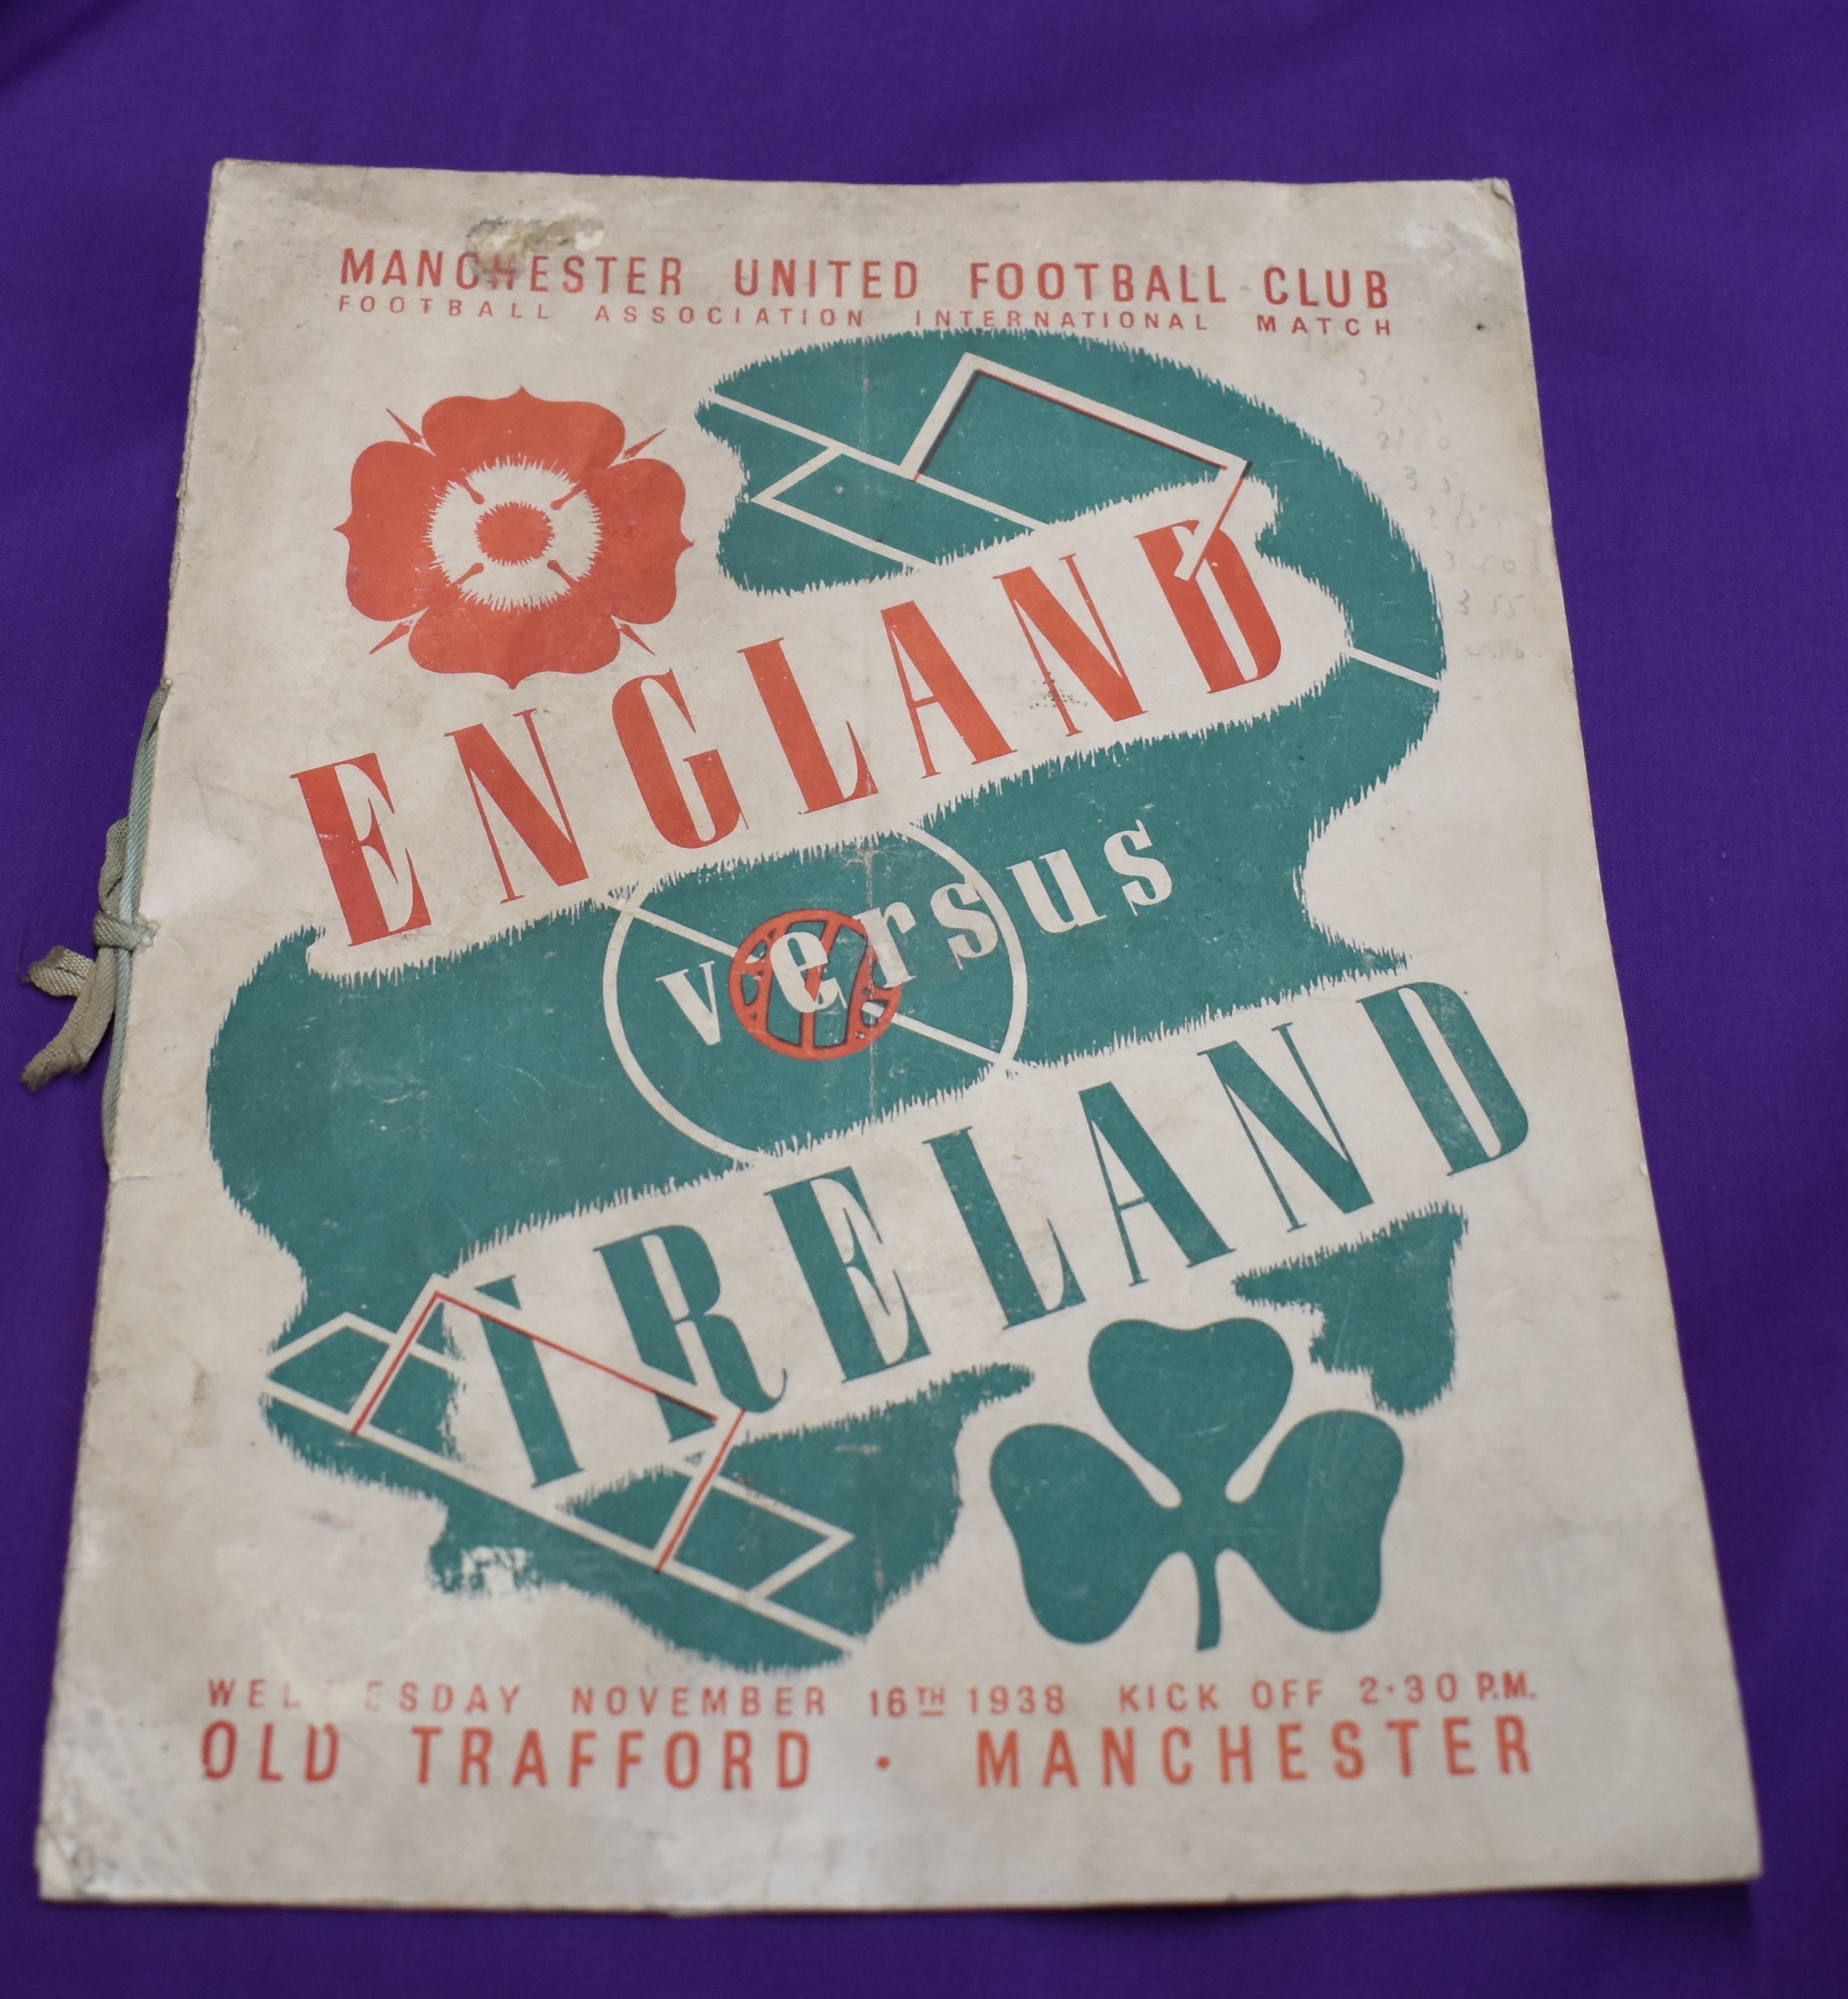 Programme England v Ireland at Old Trafford, Manchester United 16th November 1938. Comes with